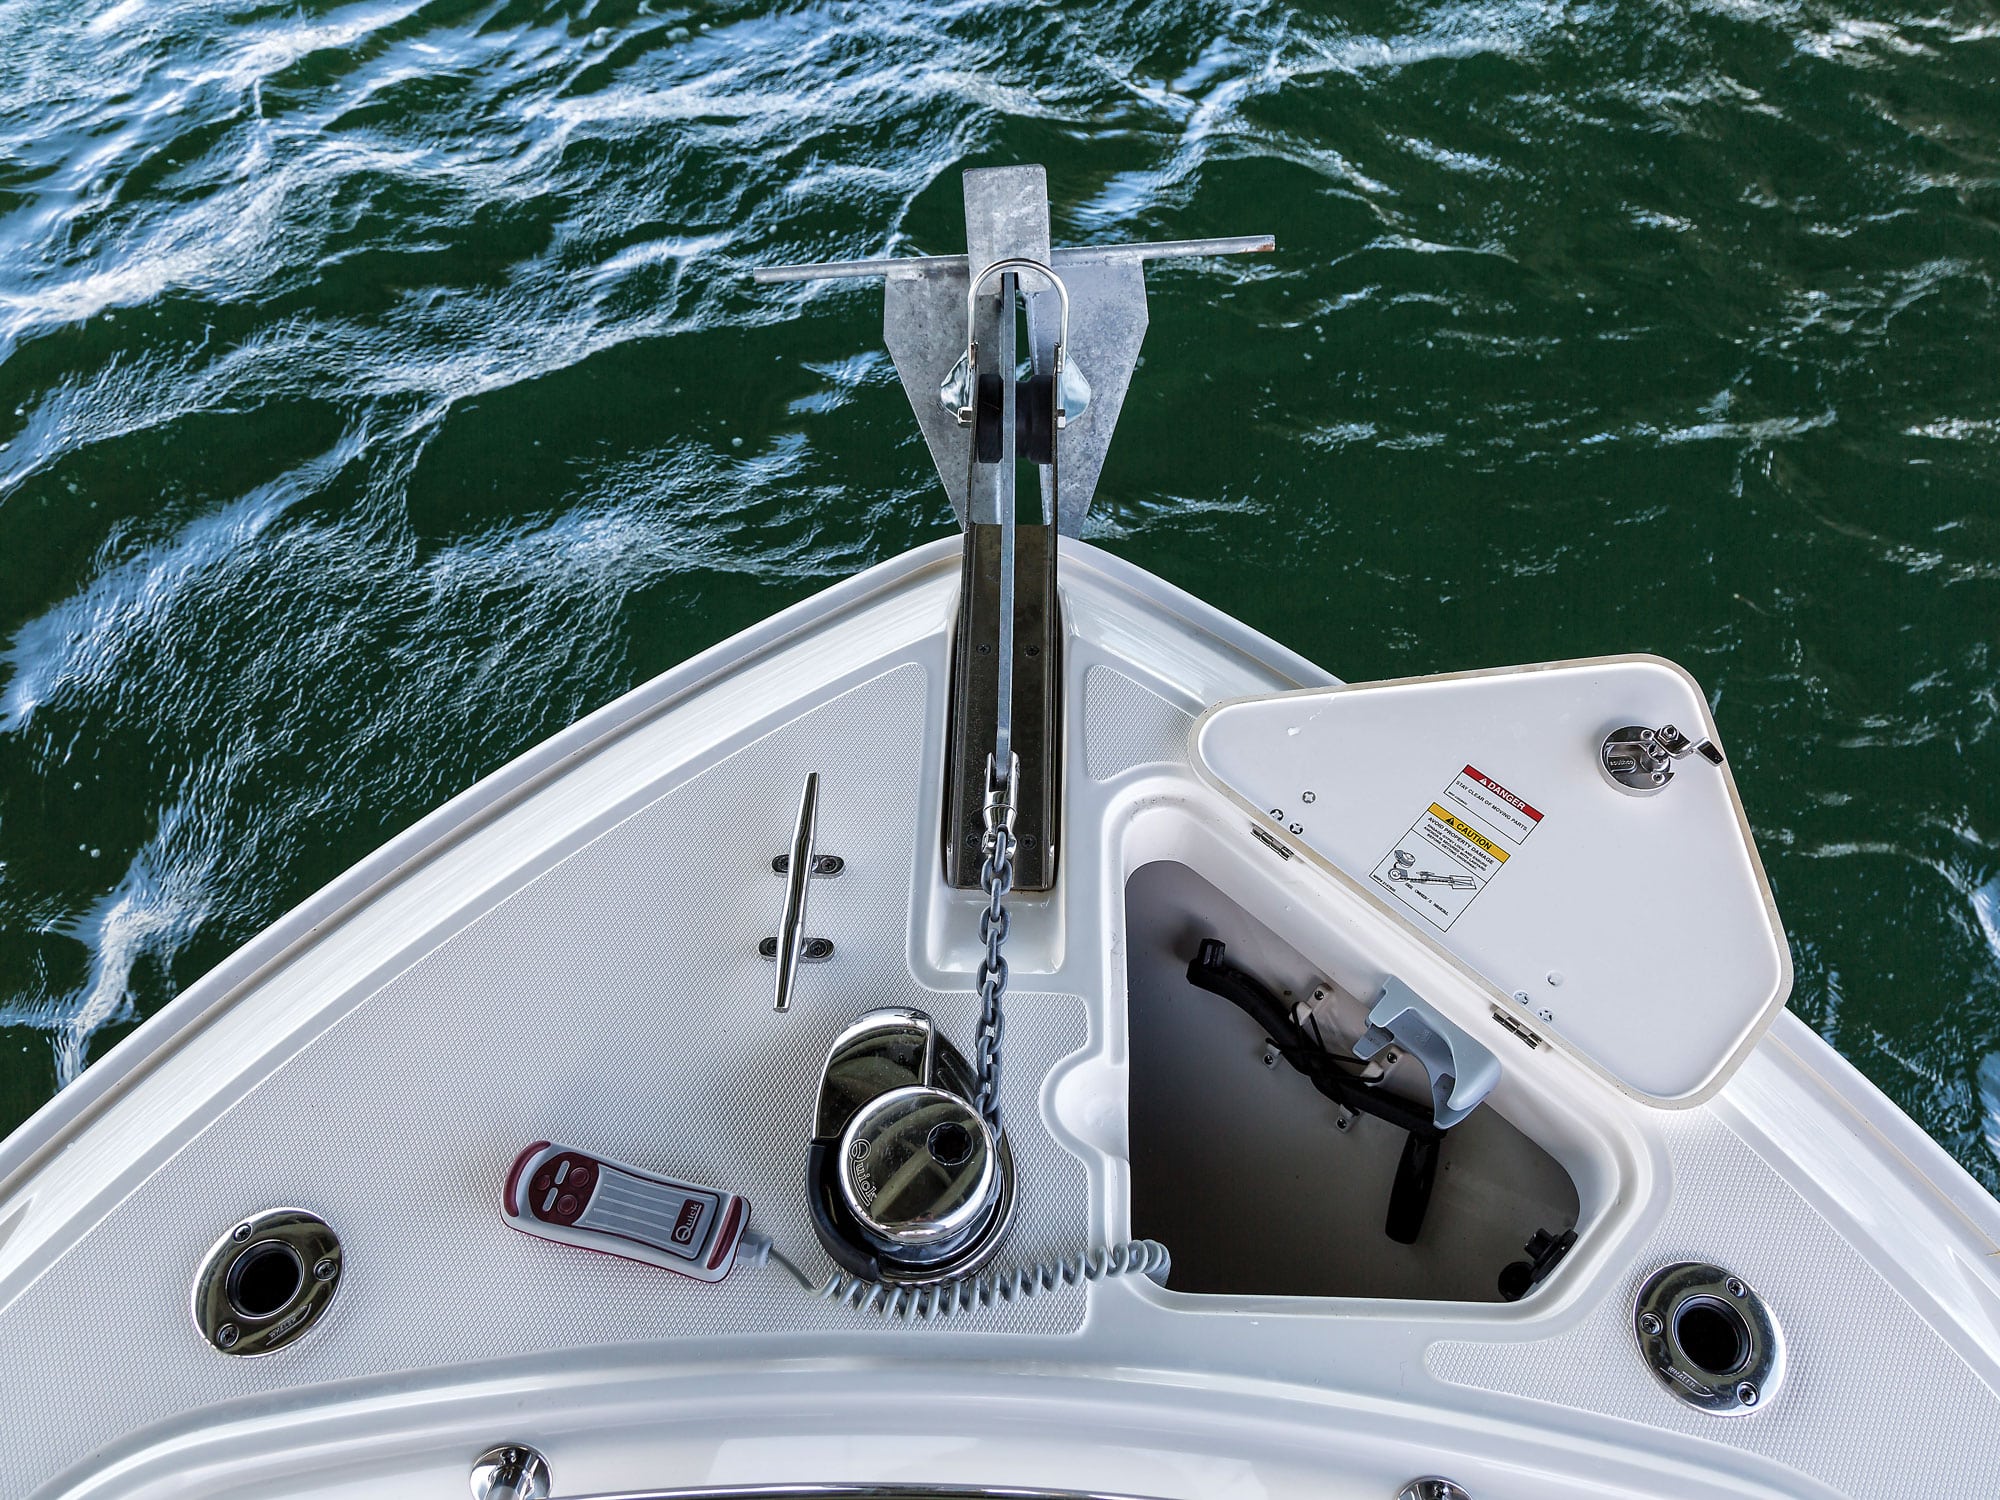 How to Anchor a Boat in Deep Water